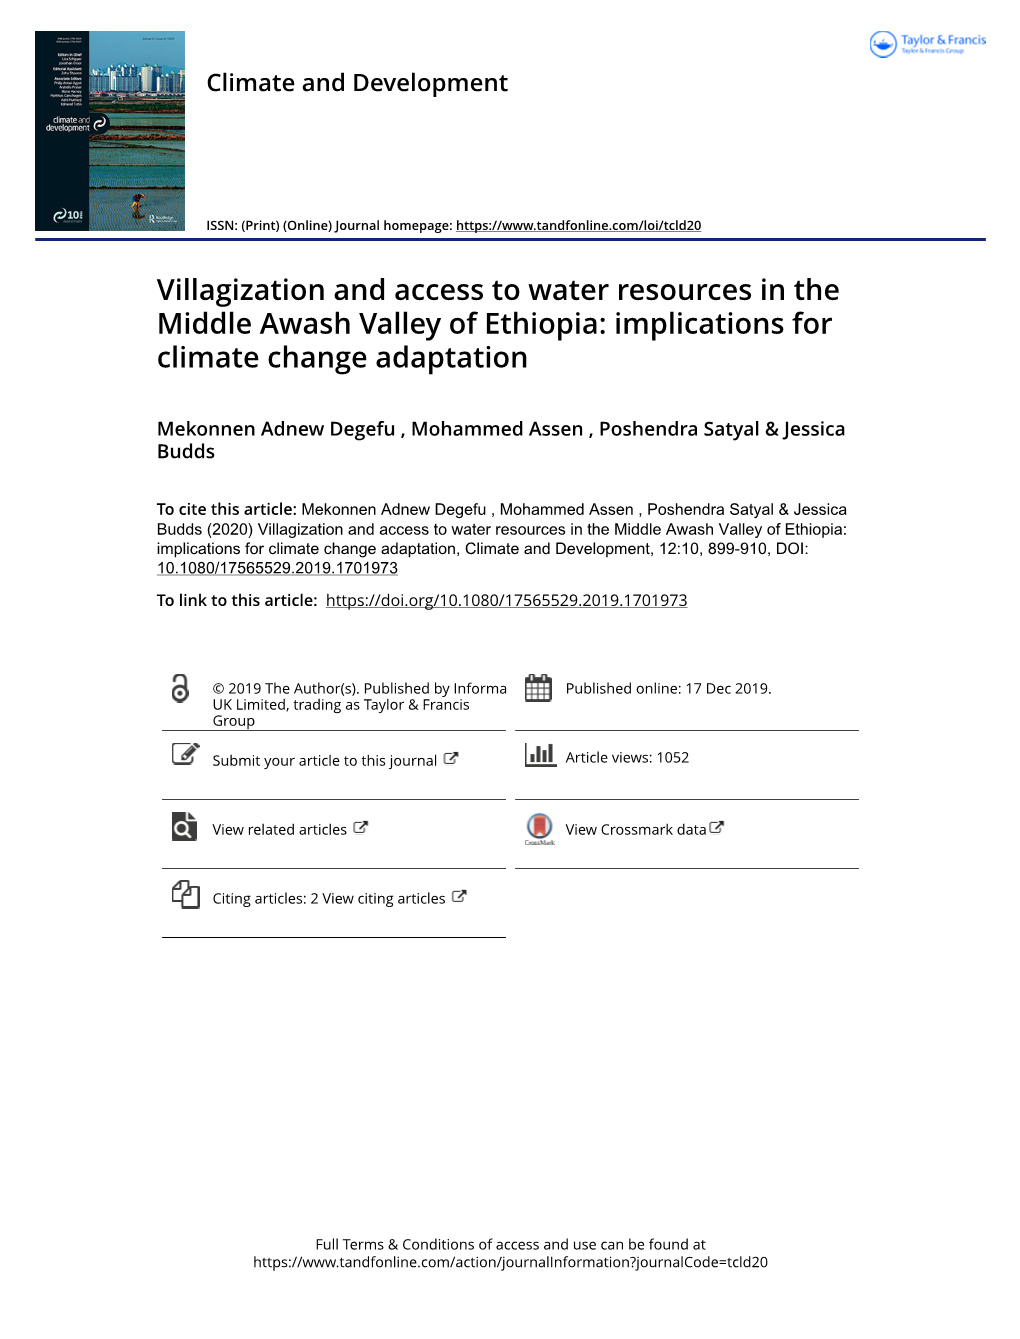 Villagization and Access to Water Resources in the Middle Awash Valley of Ethiopia: Implications for Climate Change Adaptation